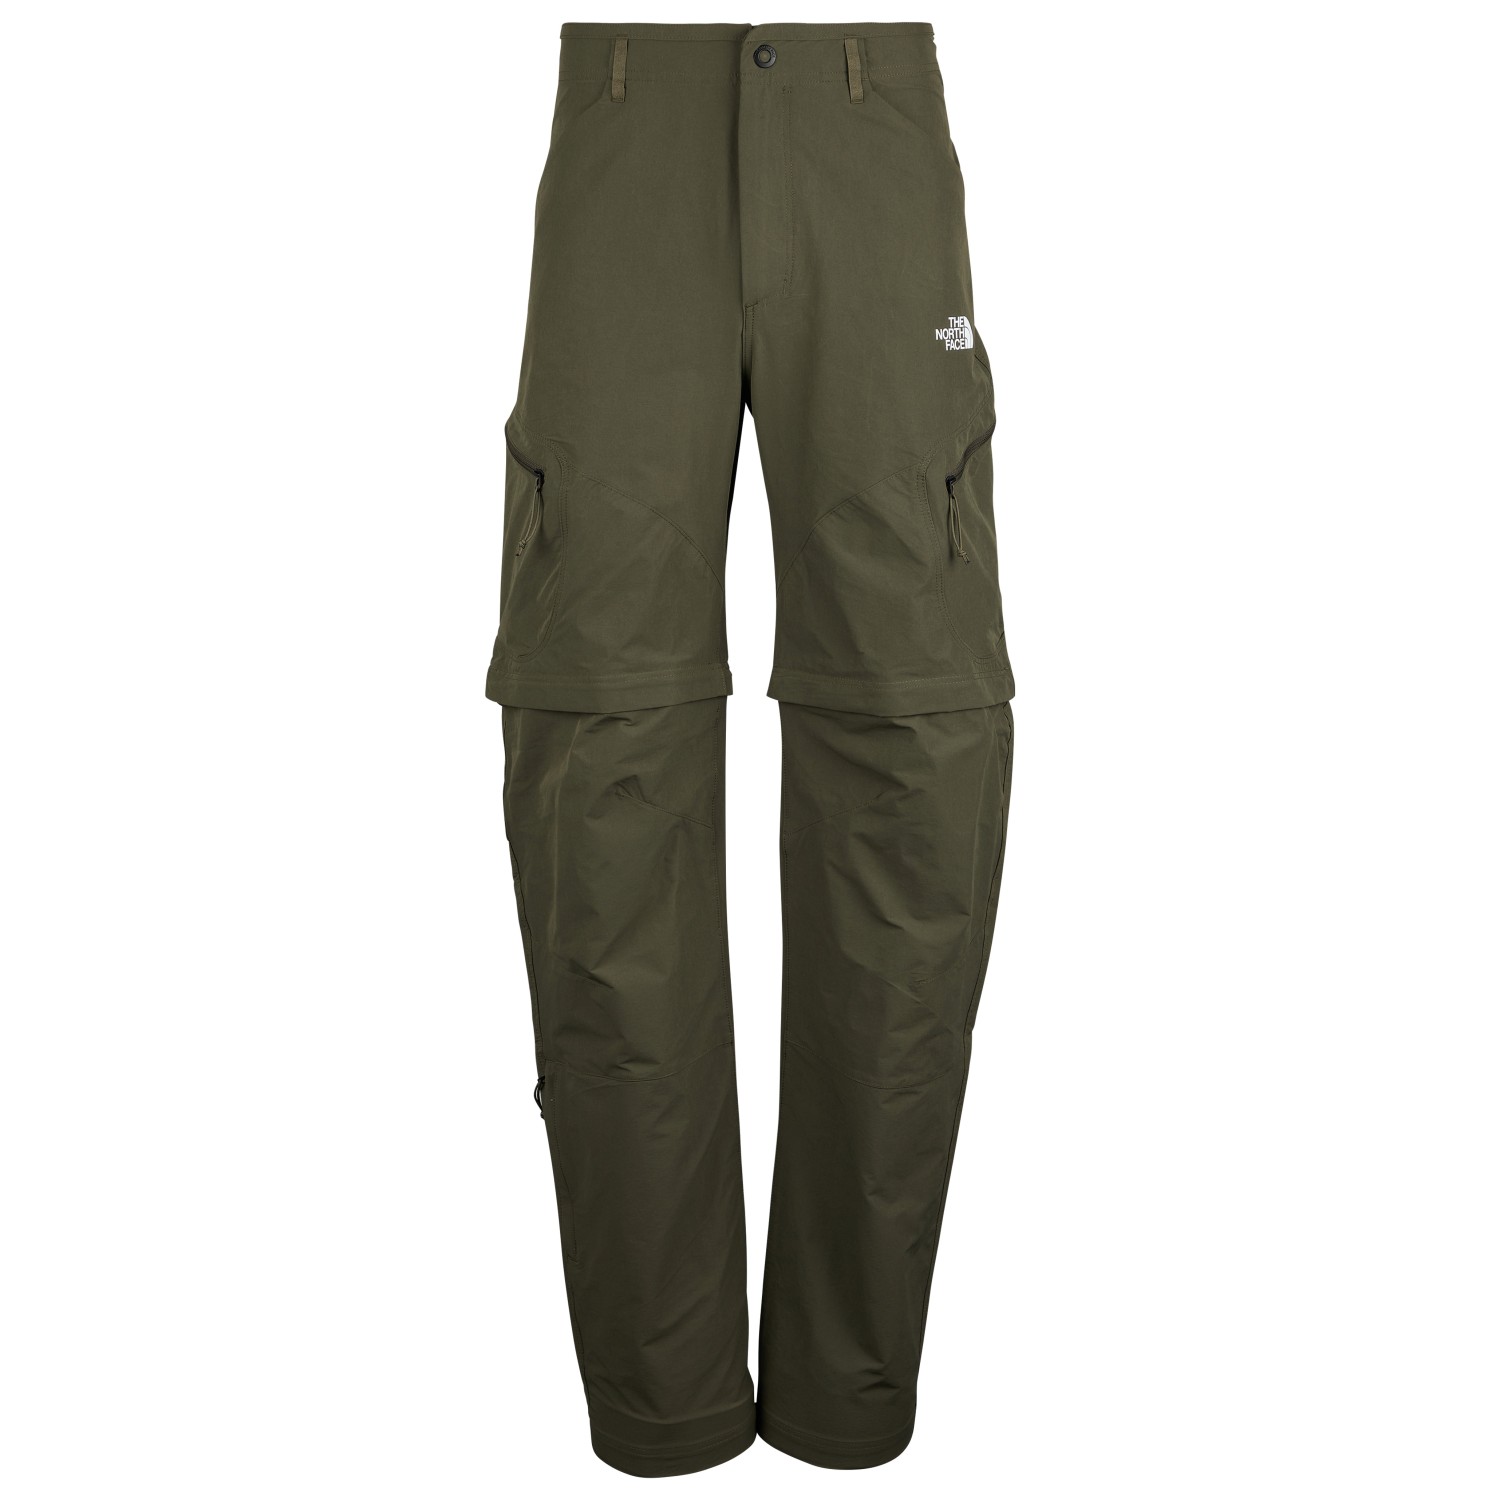 Трекинговые брюки The North Face Exploration Convertible Pant, цвет New Taupe Green куртка the north face w ins arctic mtn jkt new taupe gree женщины t93yu821l s